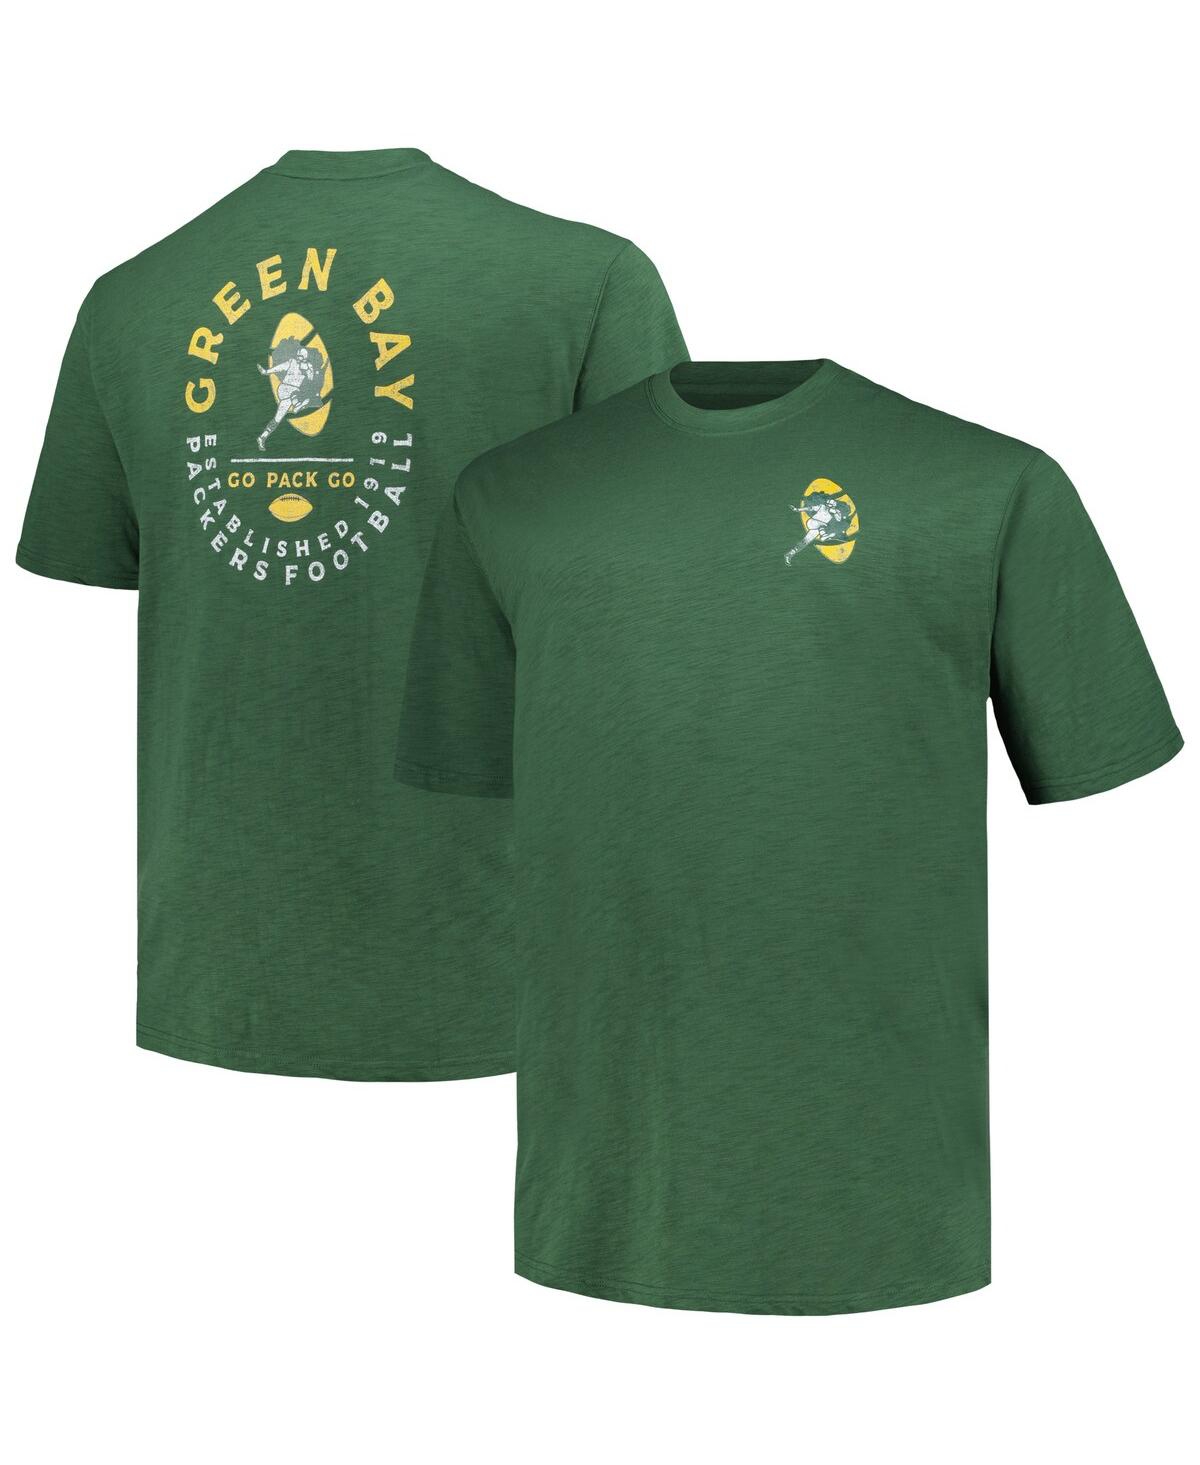 Men's Profile Green Green Bay Packers Big and Tall Two-Hit Throwback T-shirt - Green